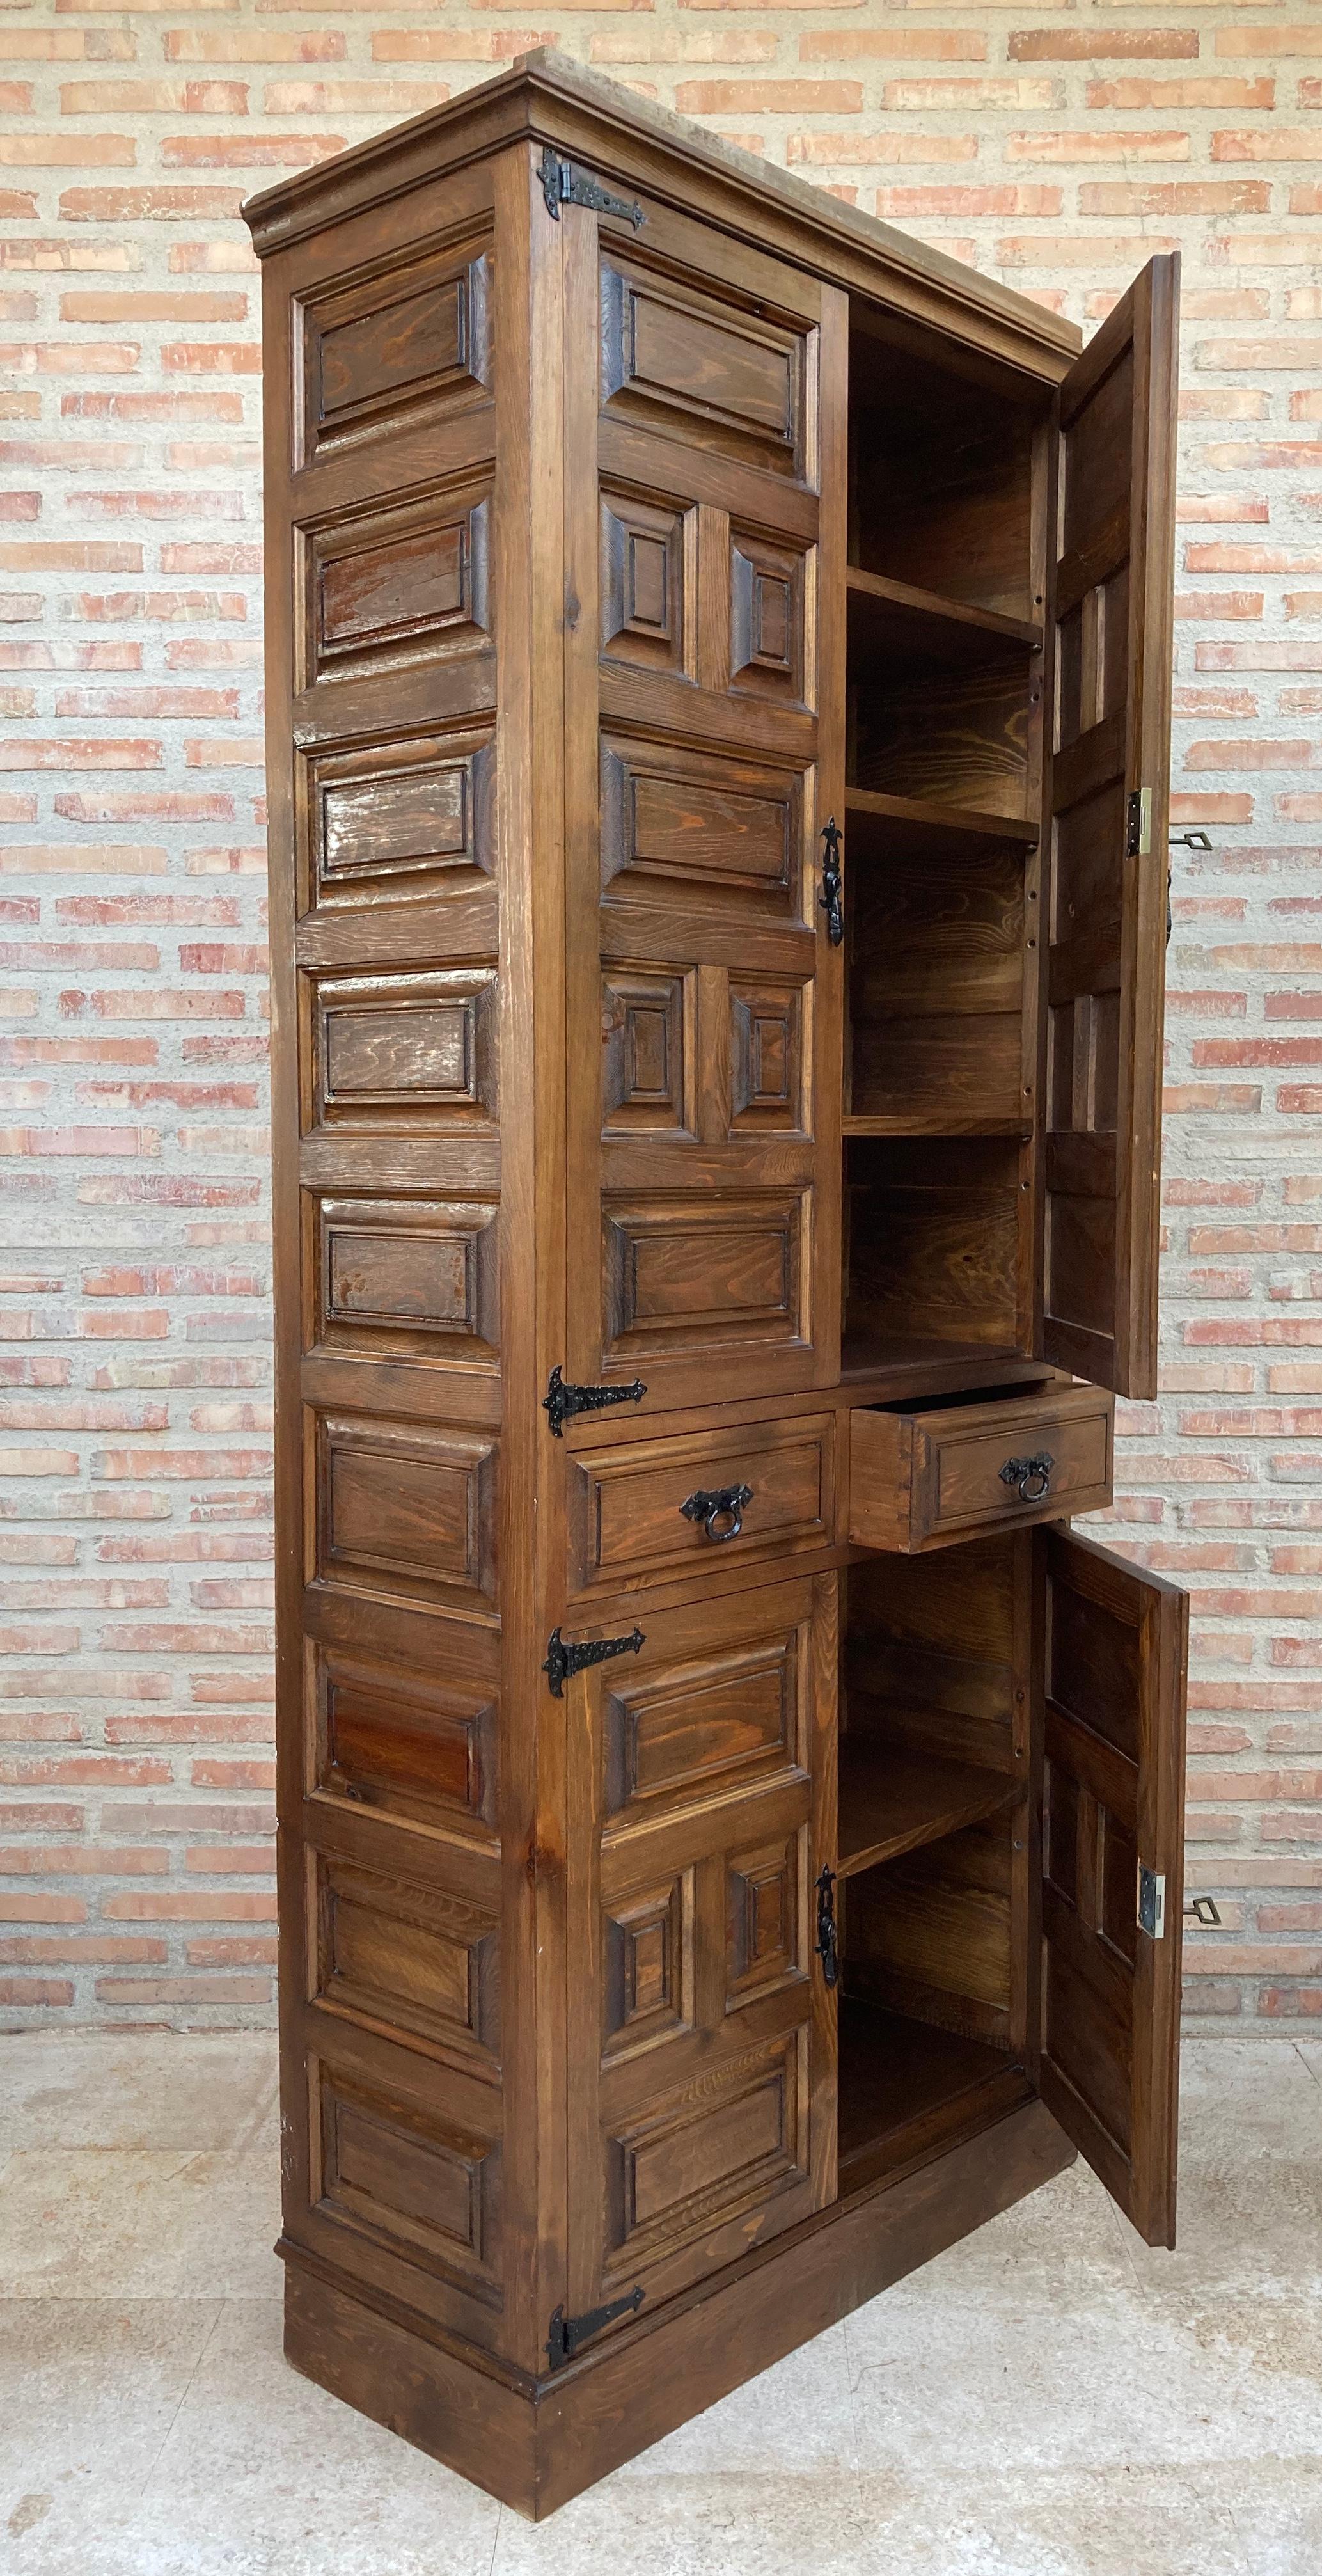 Grand 20th century Spanish armario or wardrobe armoire constructed from walnut. Features a coffered case fronted by two doors. This massive cabinet made in Spain features beautiful walnut grain and showcases the amazing craftsmanship. There is a